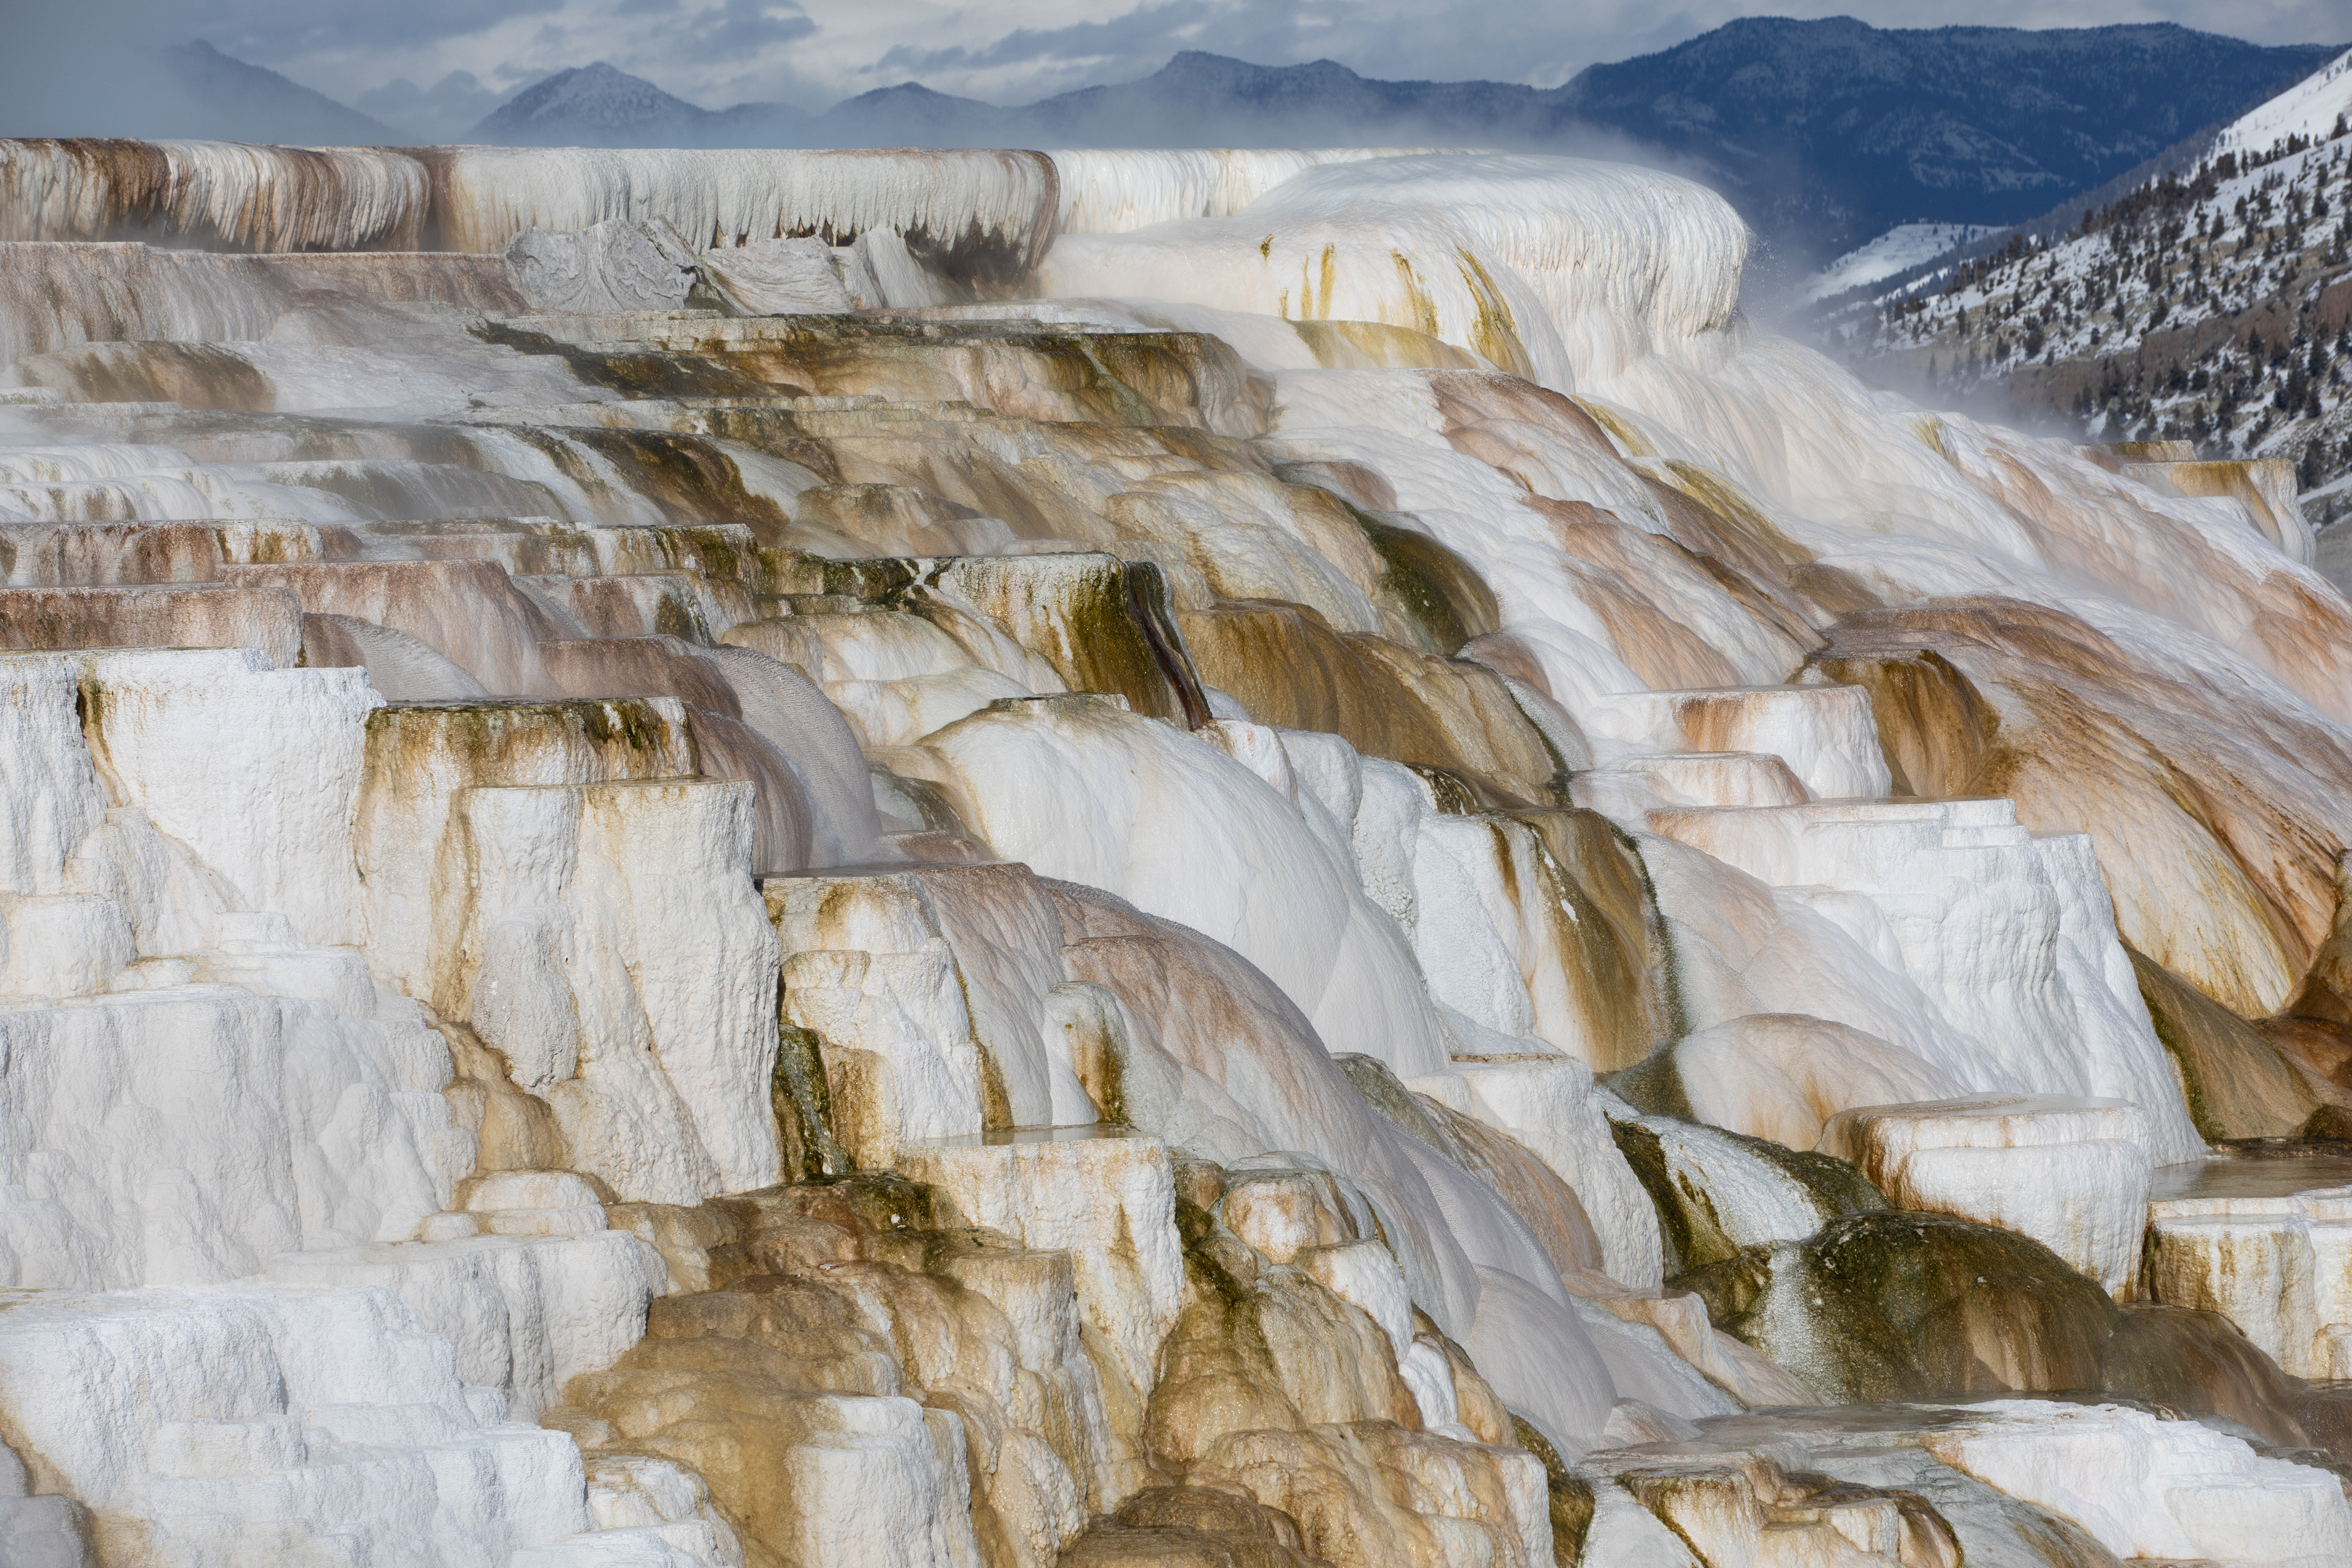 Hot water flows over travertine terraces.